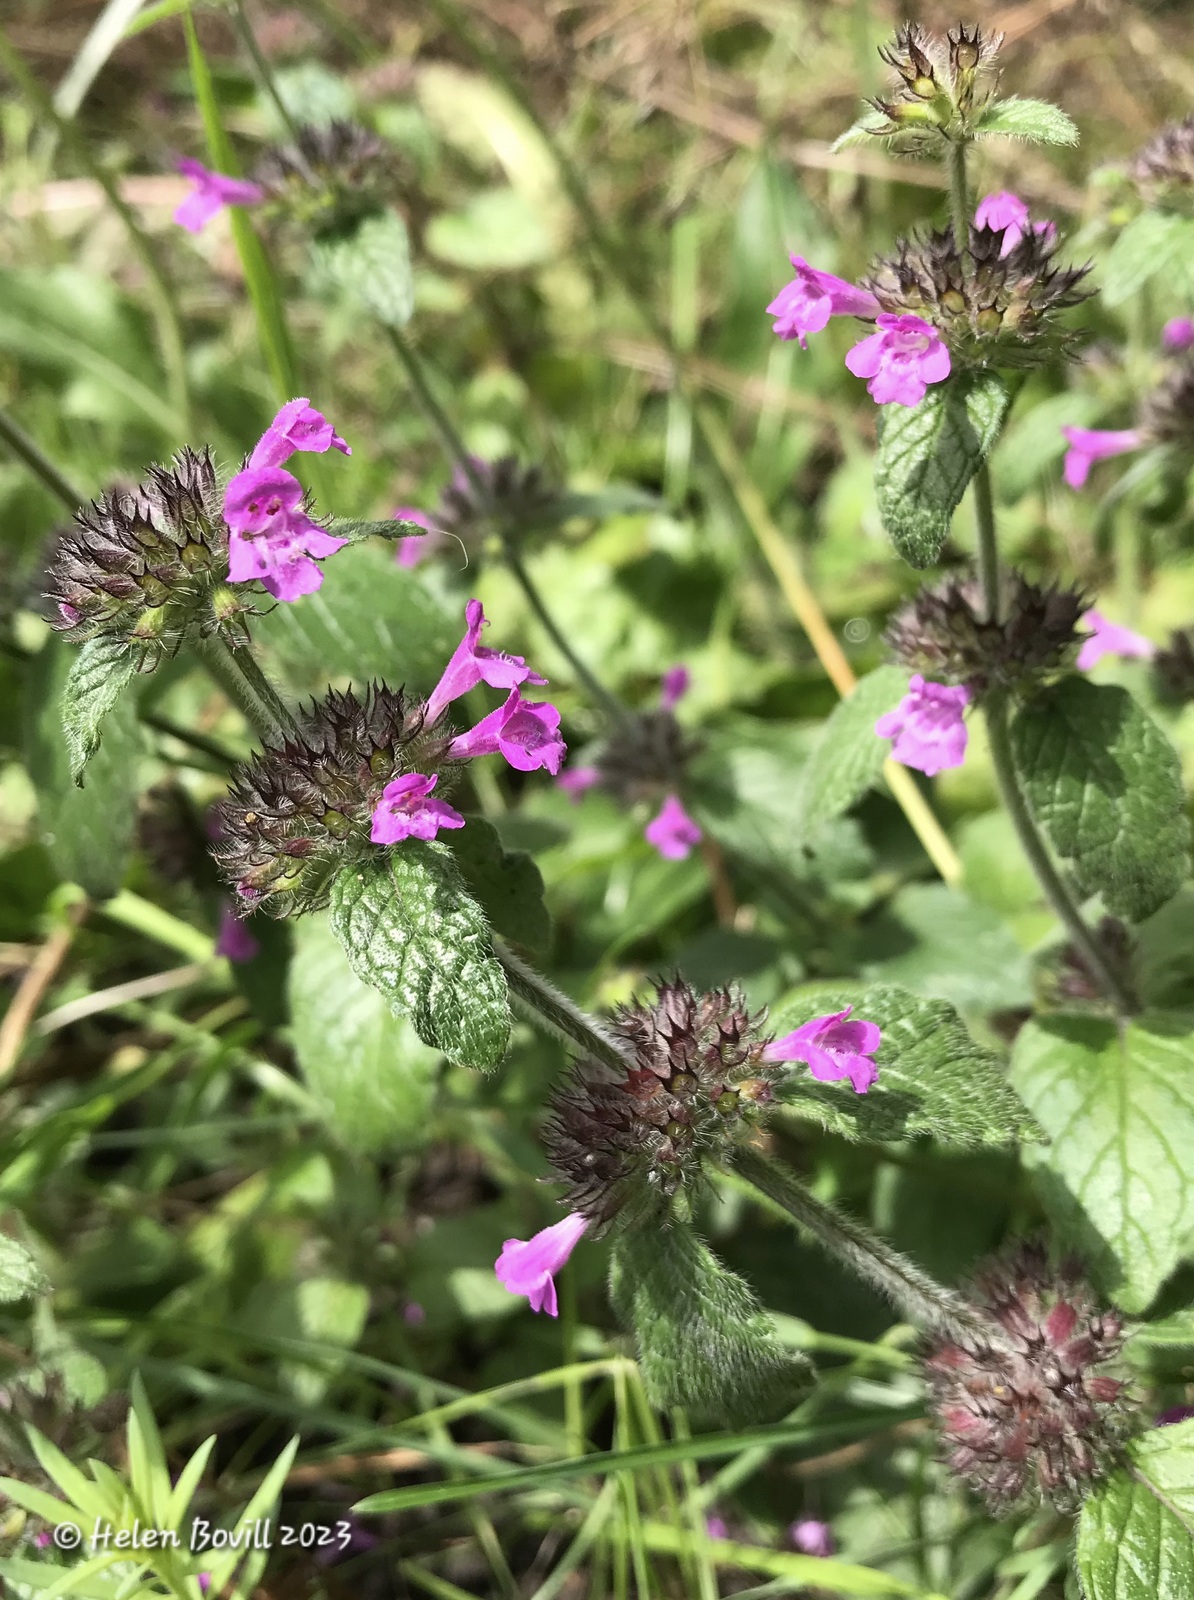 The pink flowers of the Wild Basil